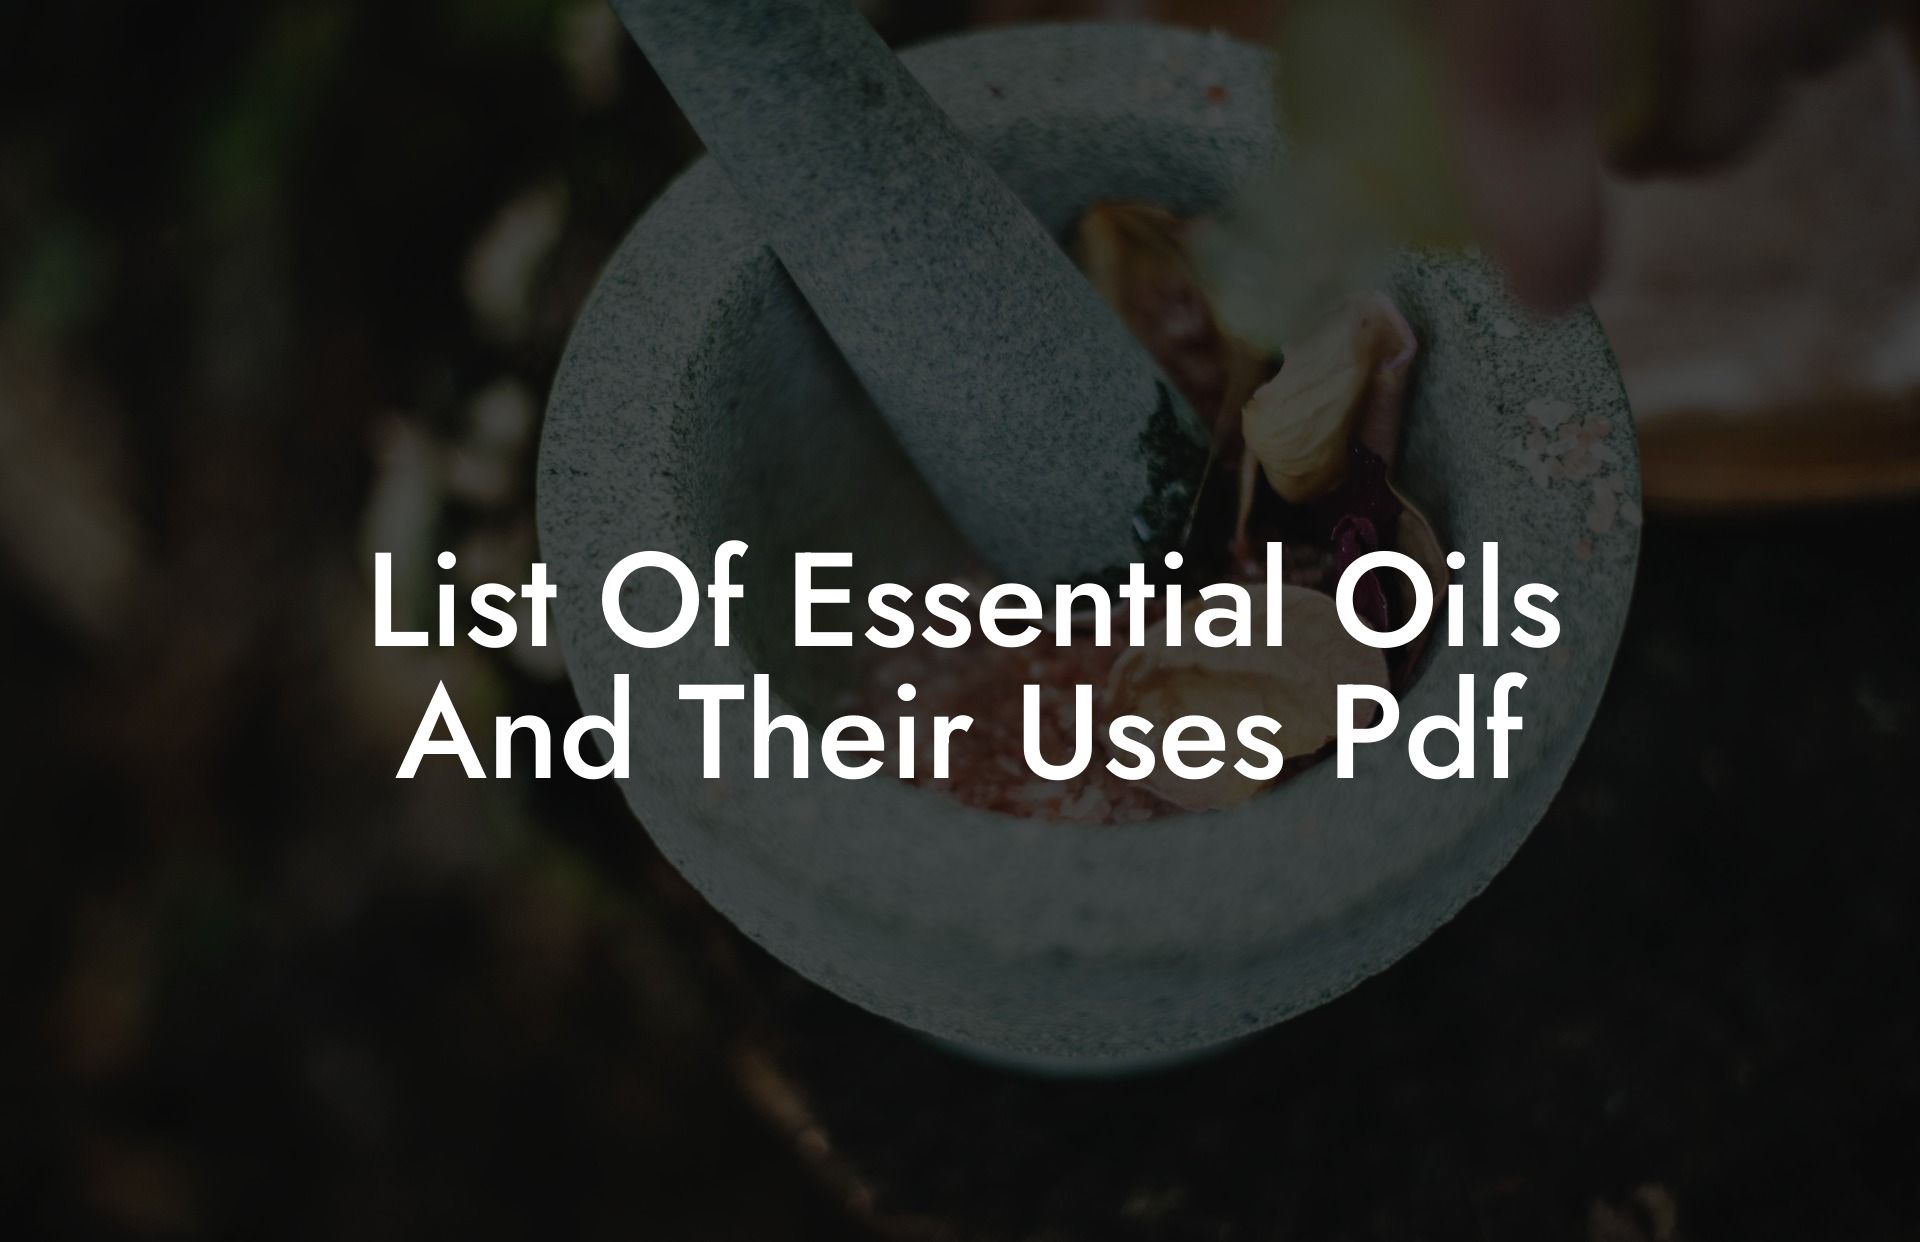 List Of Essential Oils And Their Uses Pdf